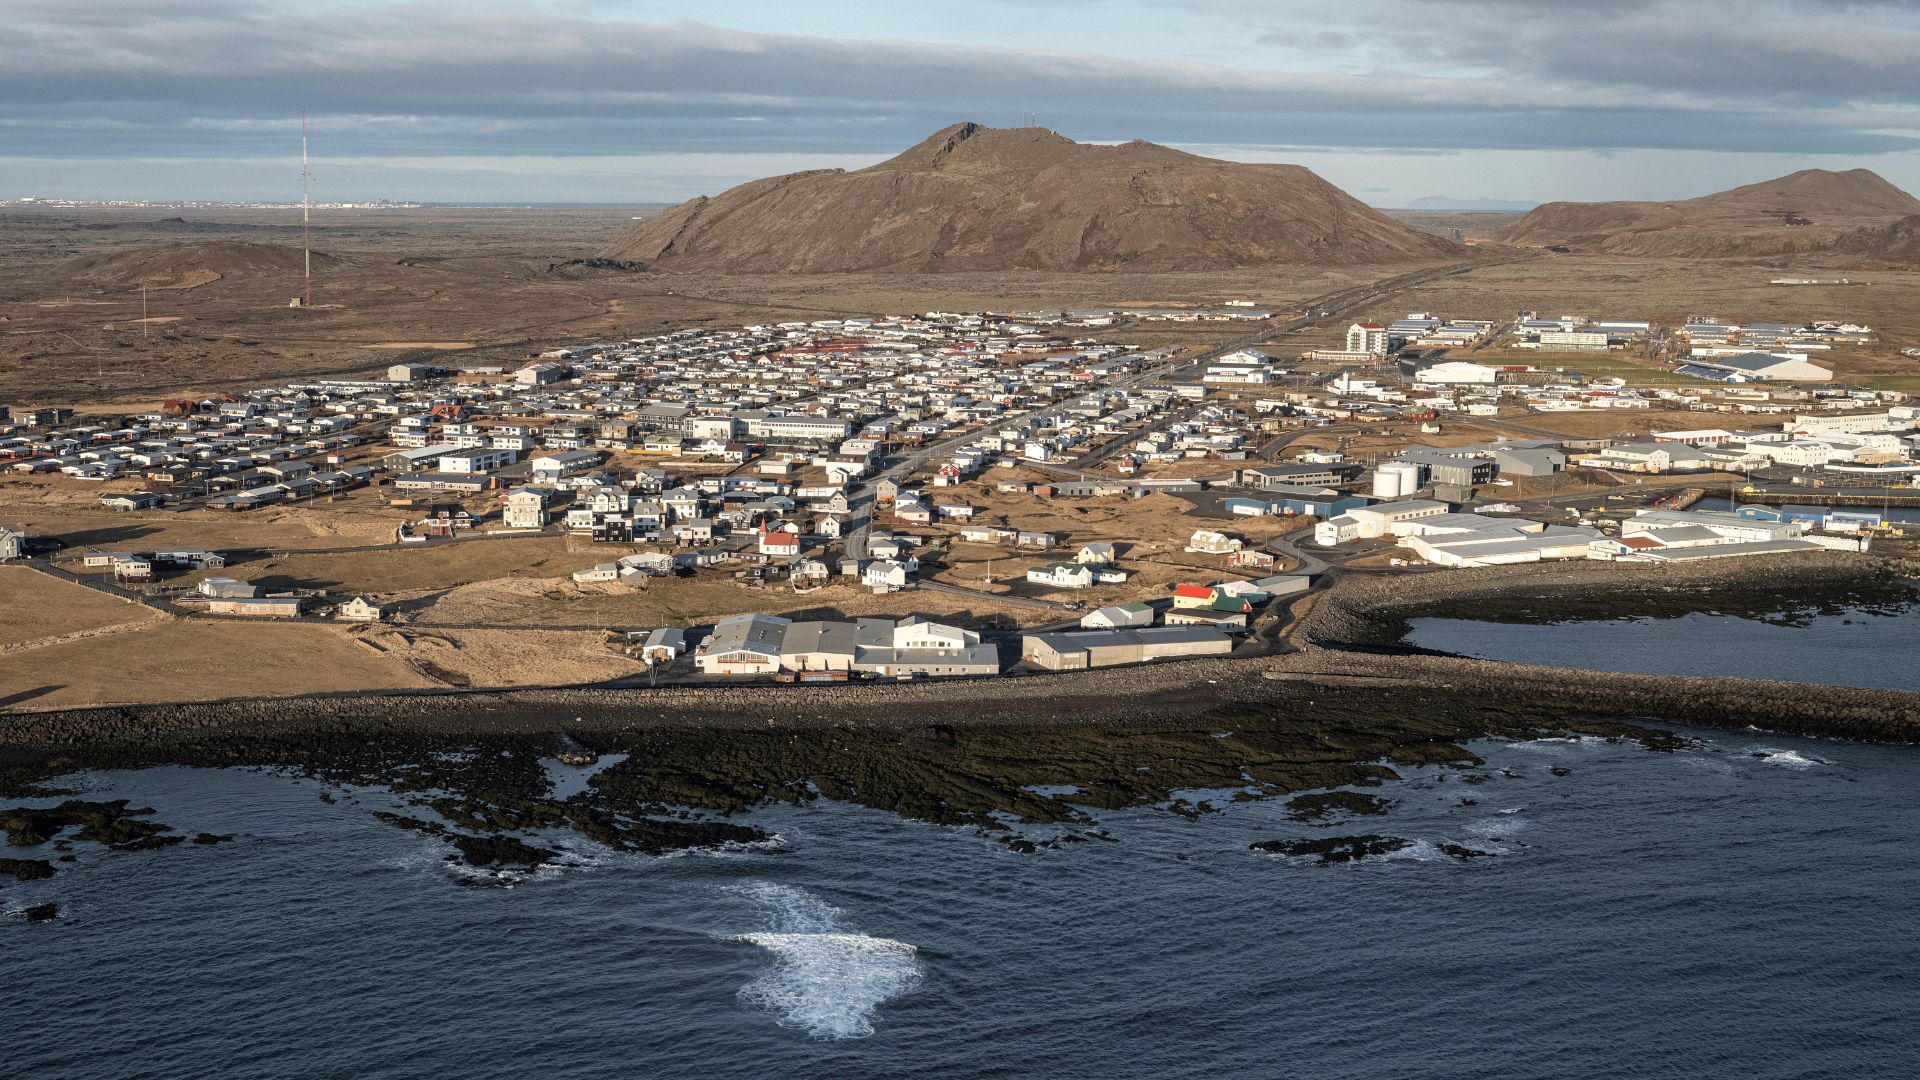 General view of the town of Grindavik, which was evacuated due to volcanic activity. /Marko Djurica/Reuters